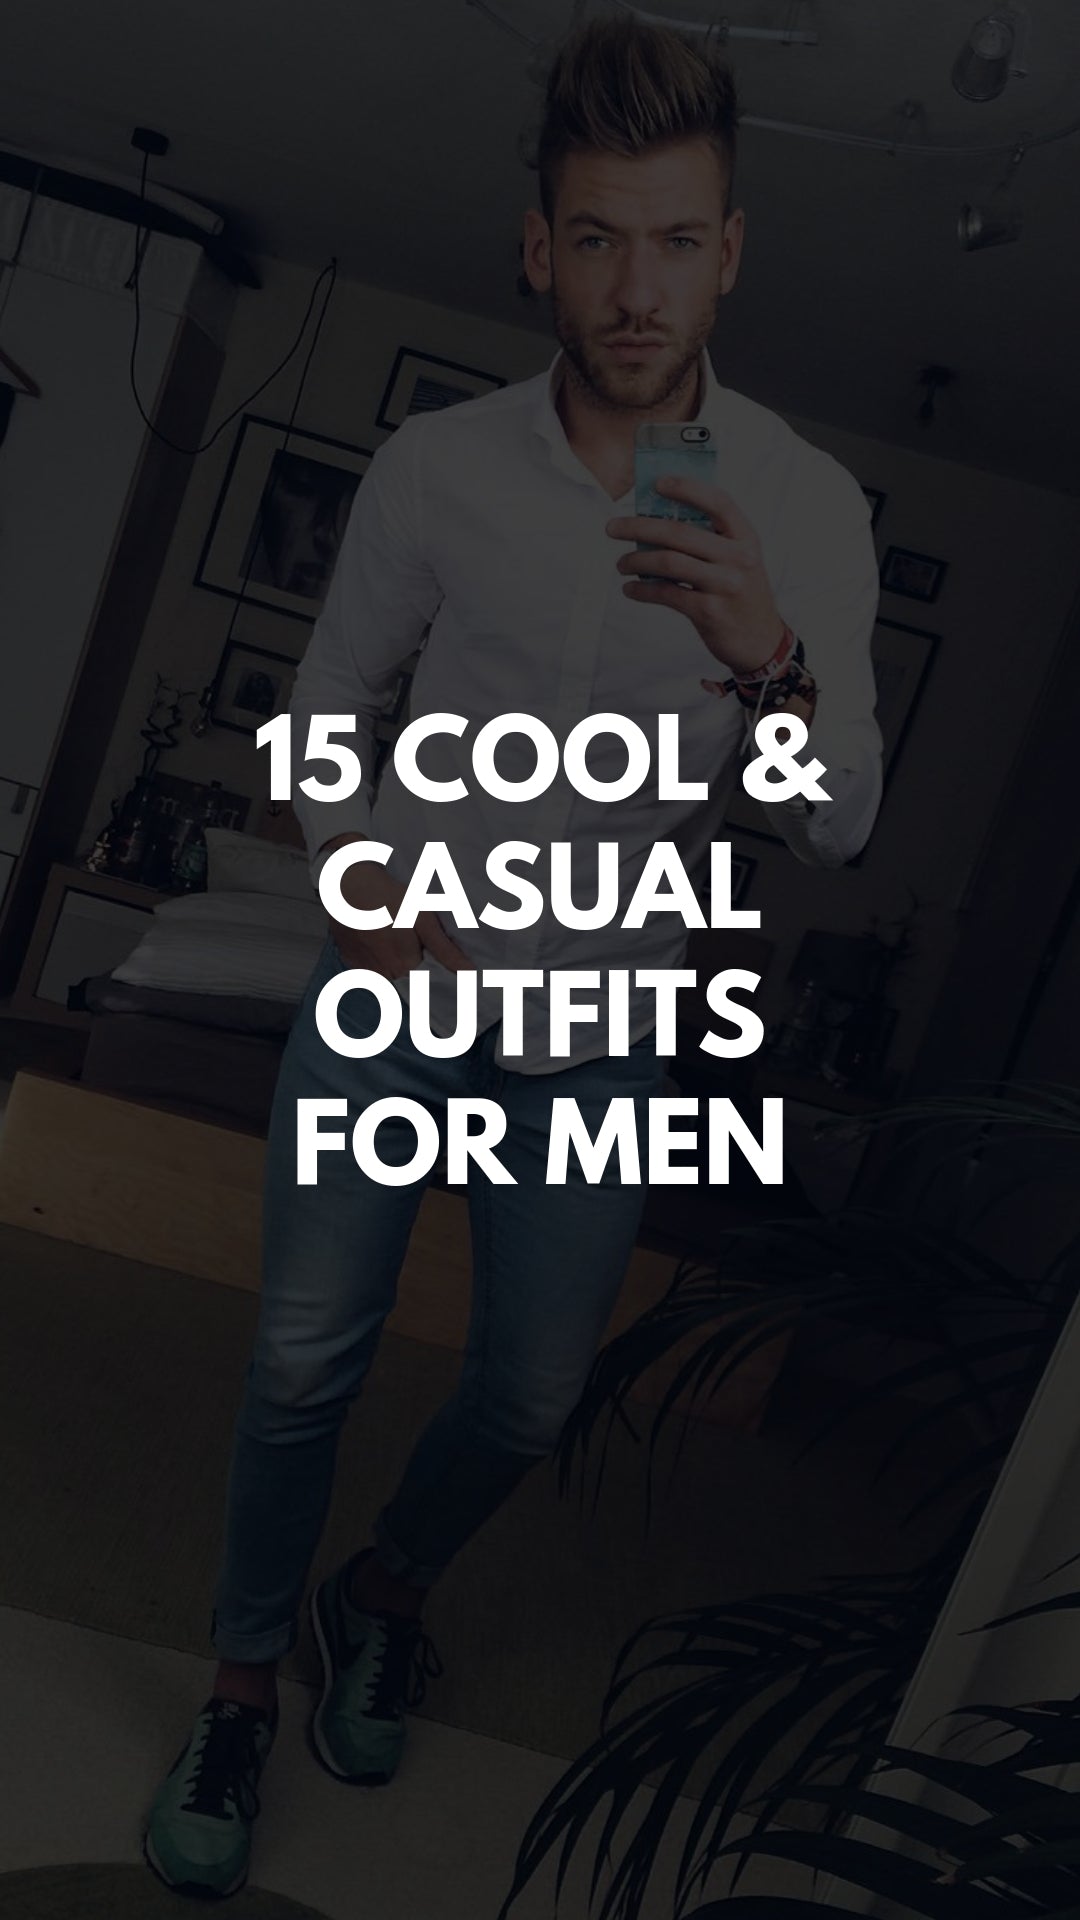 15 Insanely cool casual outfits for guys #casualoutfits #casualstyle #mensfashion #streetstyle